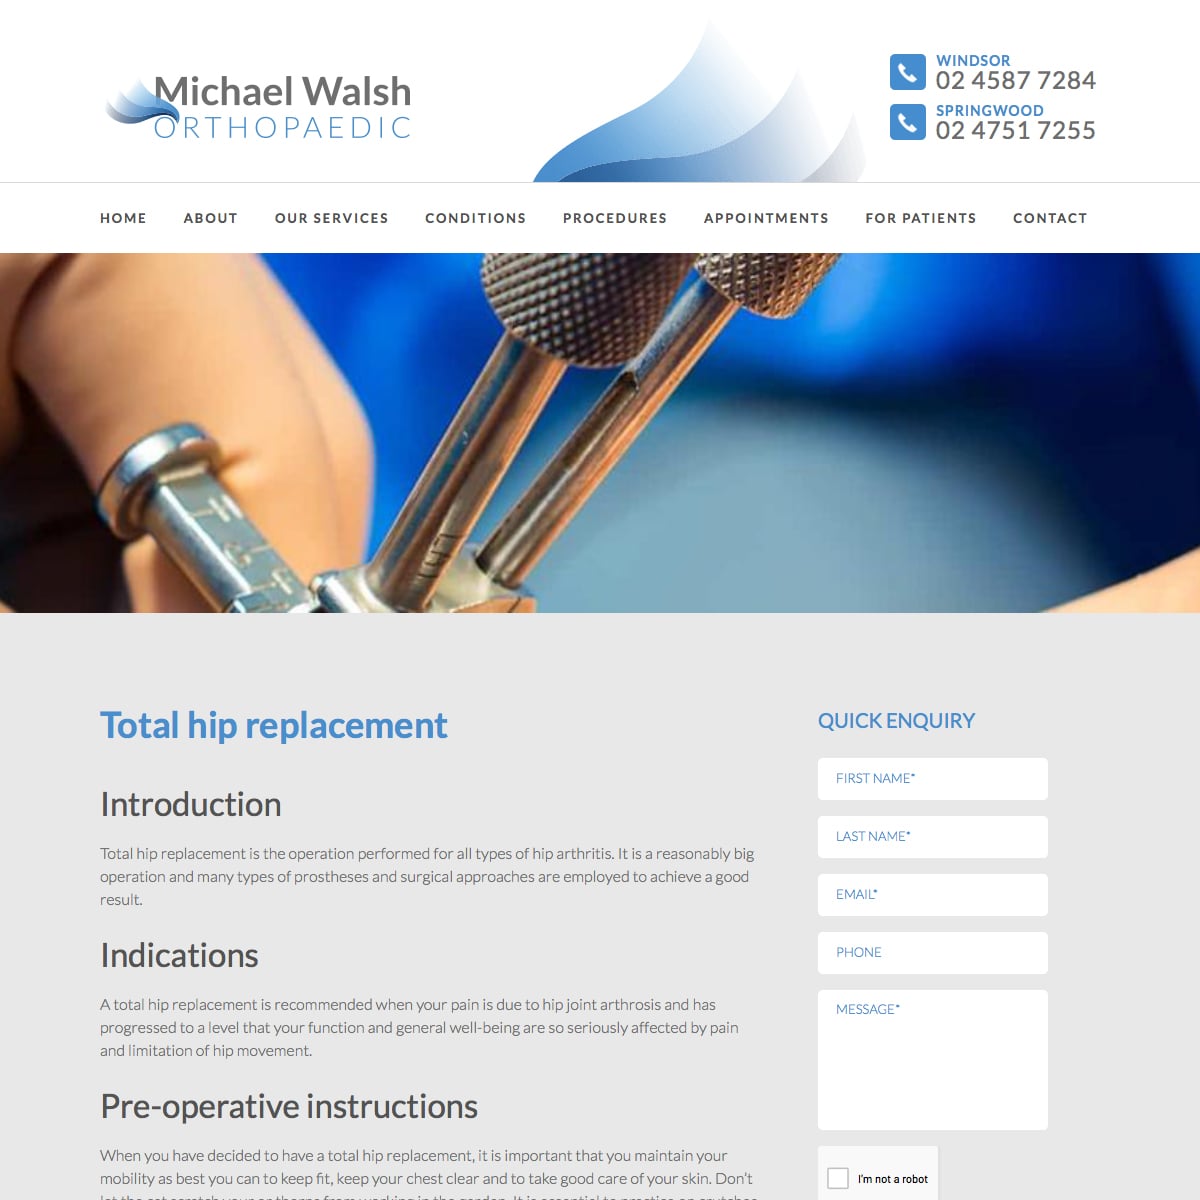 Michael Walsh Orthopaedic - Total hip replacement